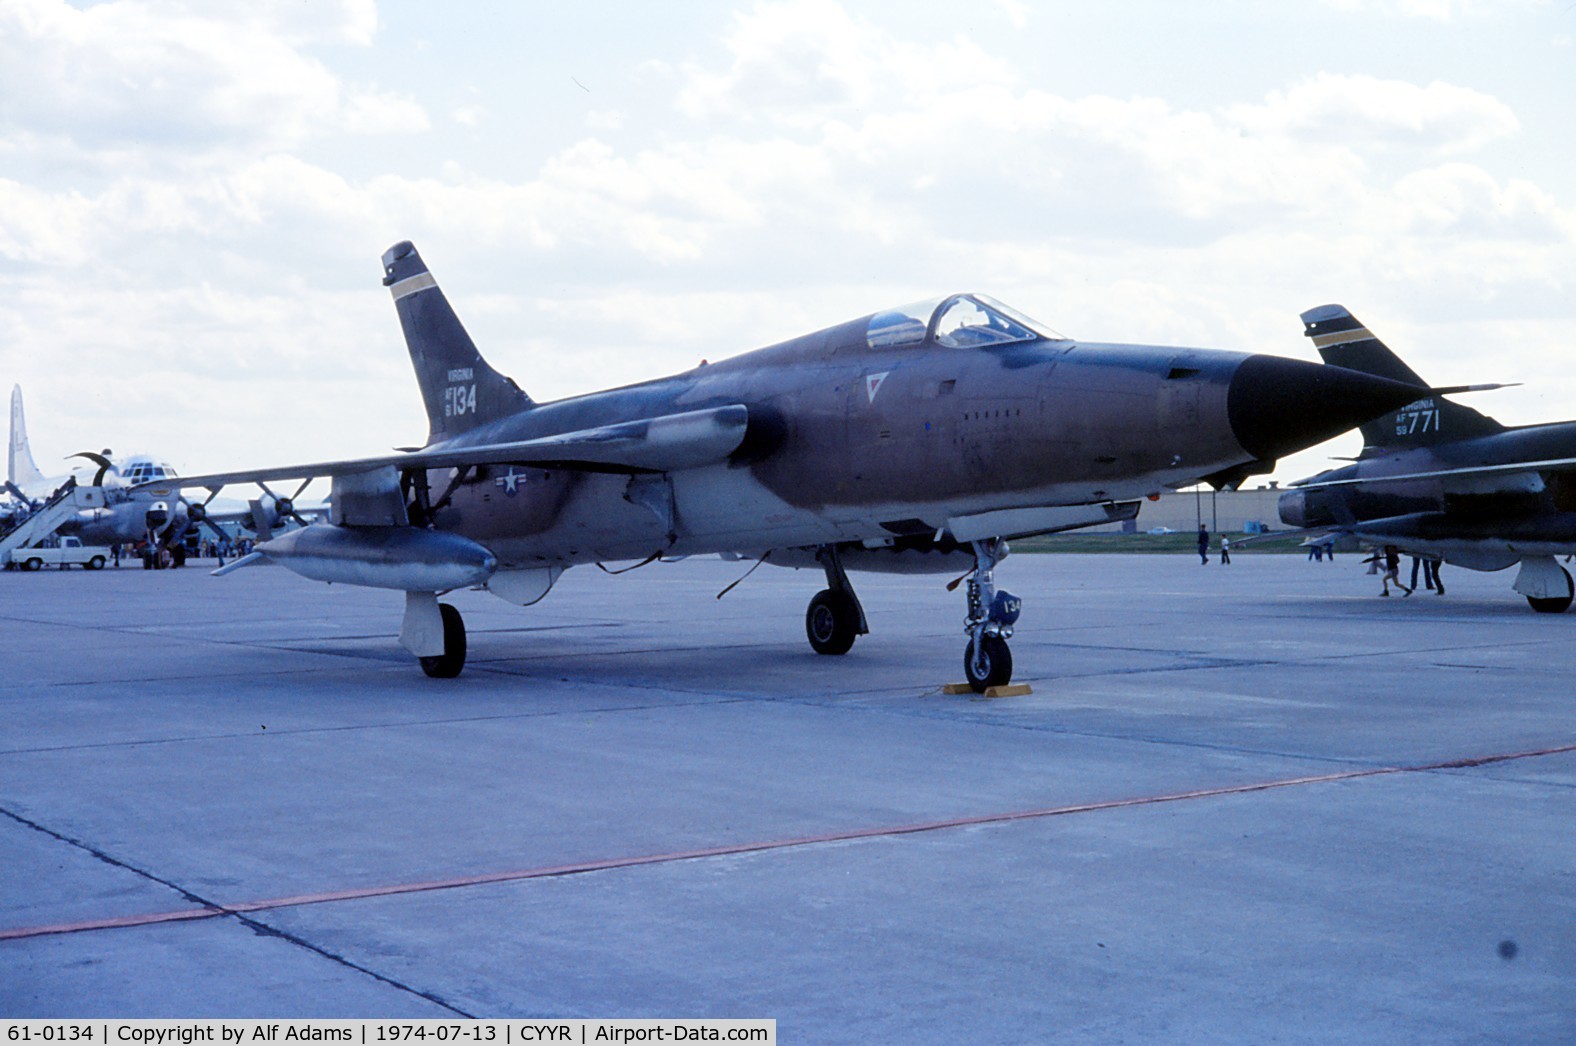 61-0134, 1961 Republic F-105D Thunderchief C/N D329, At Canadian Forces Station, Goose Bay, Labrador in 1974.